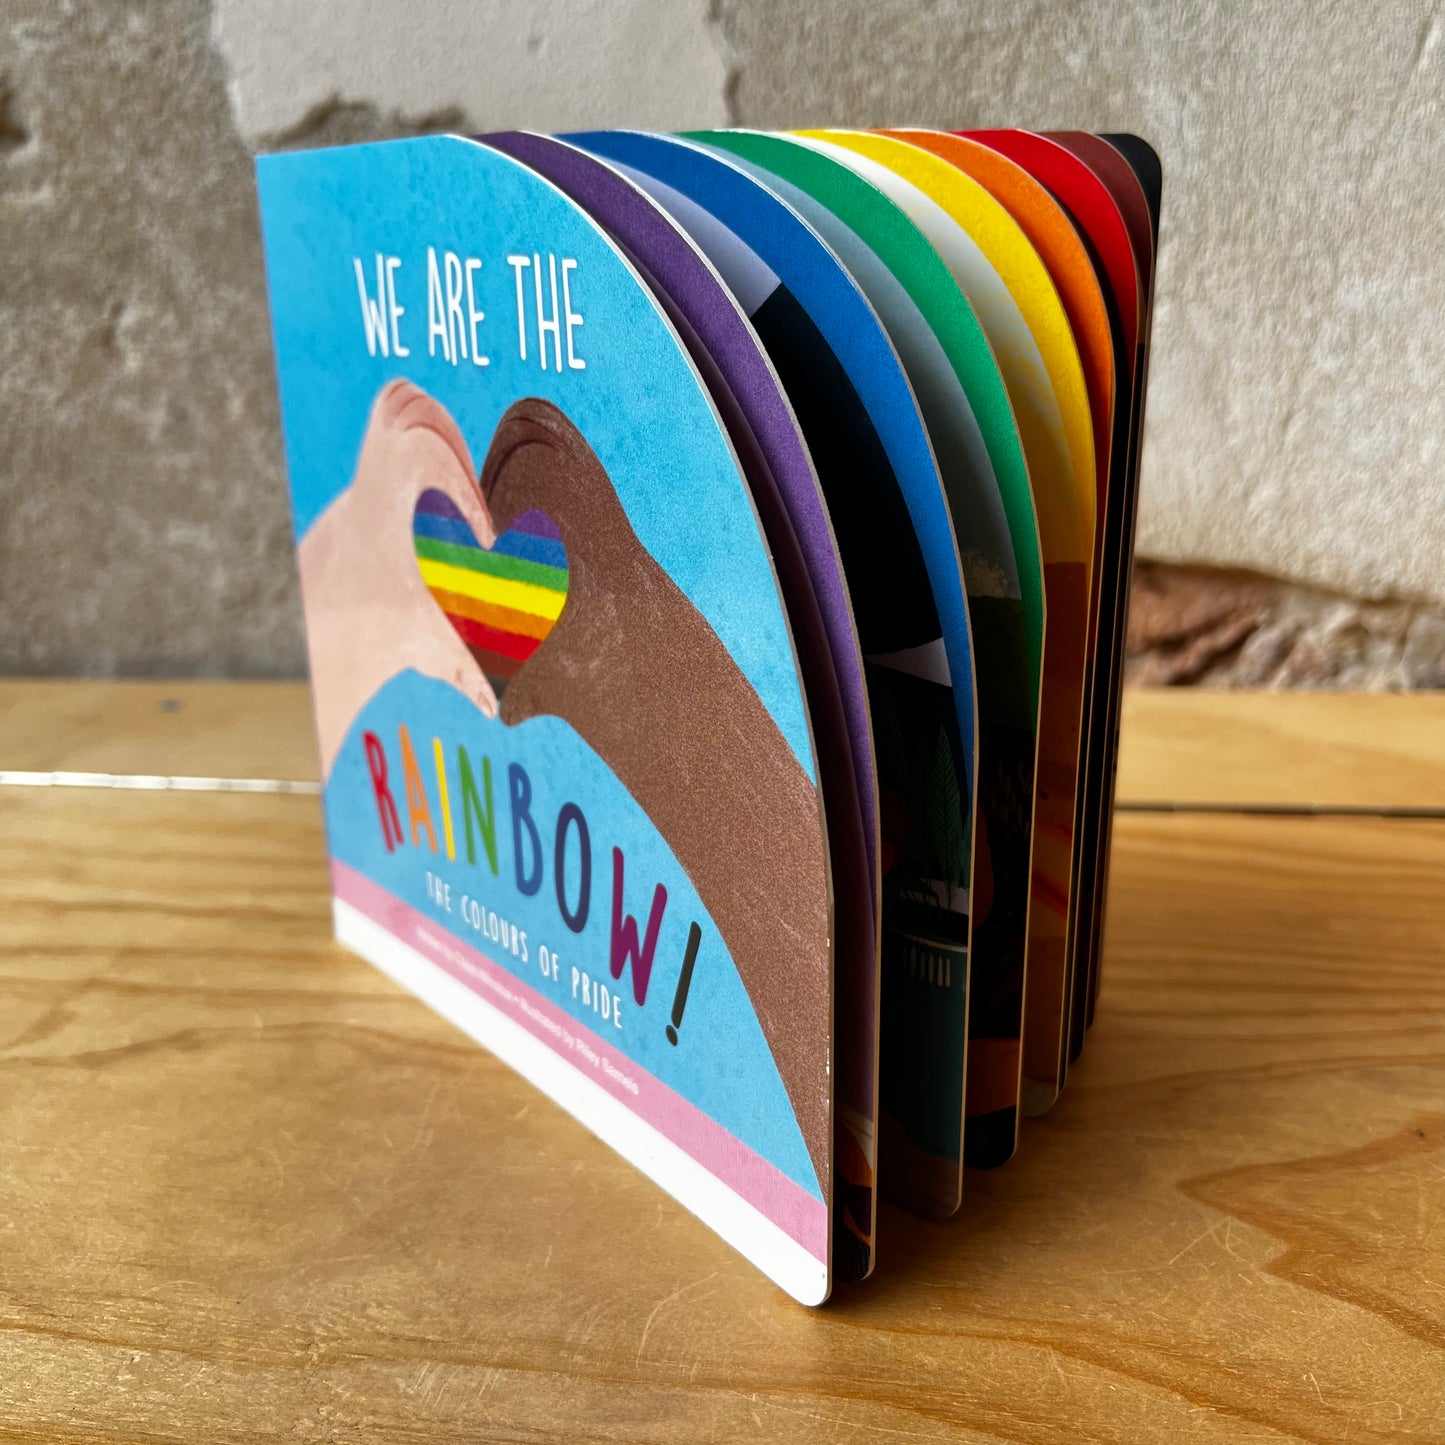 We Are The Rainbow: The Colors of Pride! – Claire Winslow, Riley Samels